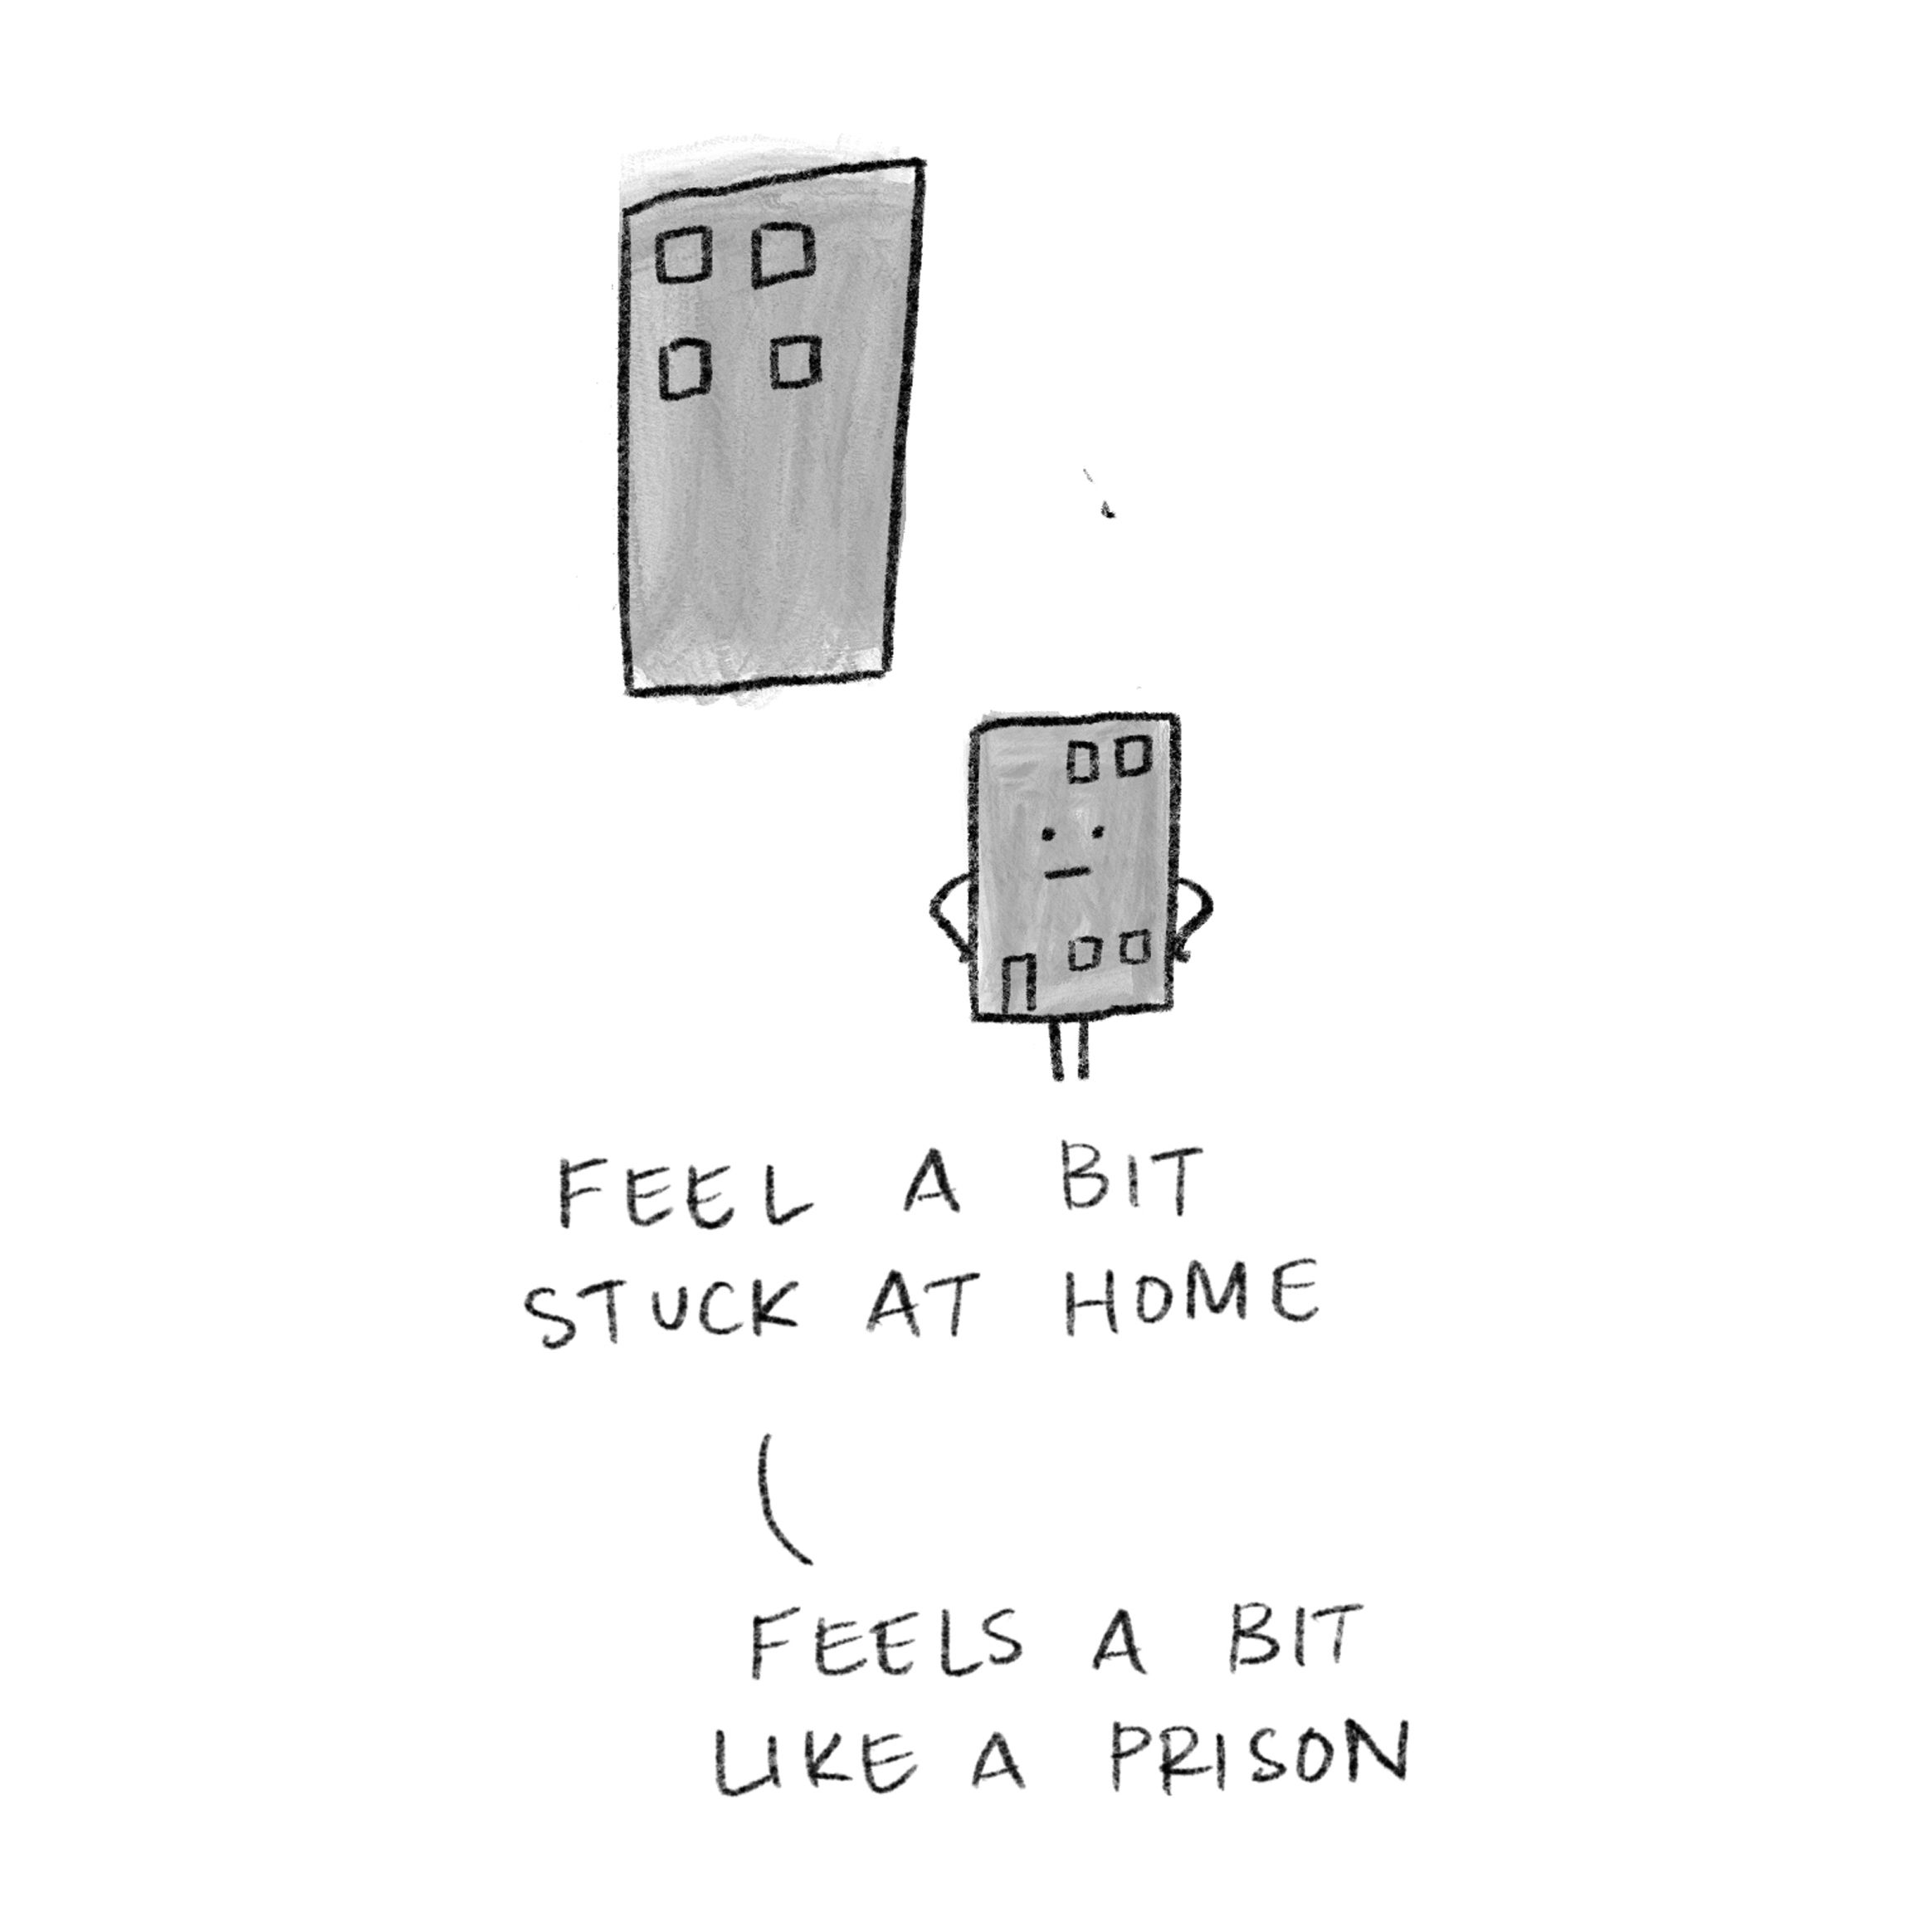 A cartoon of a two high-rise towers, one with a face and stick arms and legs with 'feel a bit stuck at home' and 'feels a bit like a prison' hand written alongside